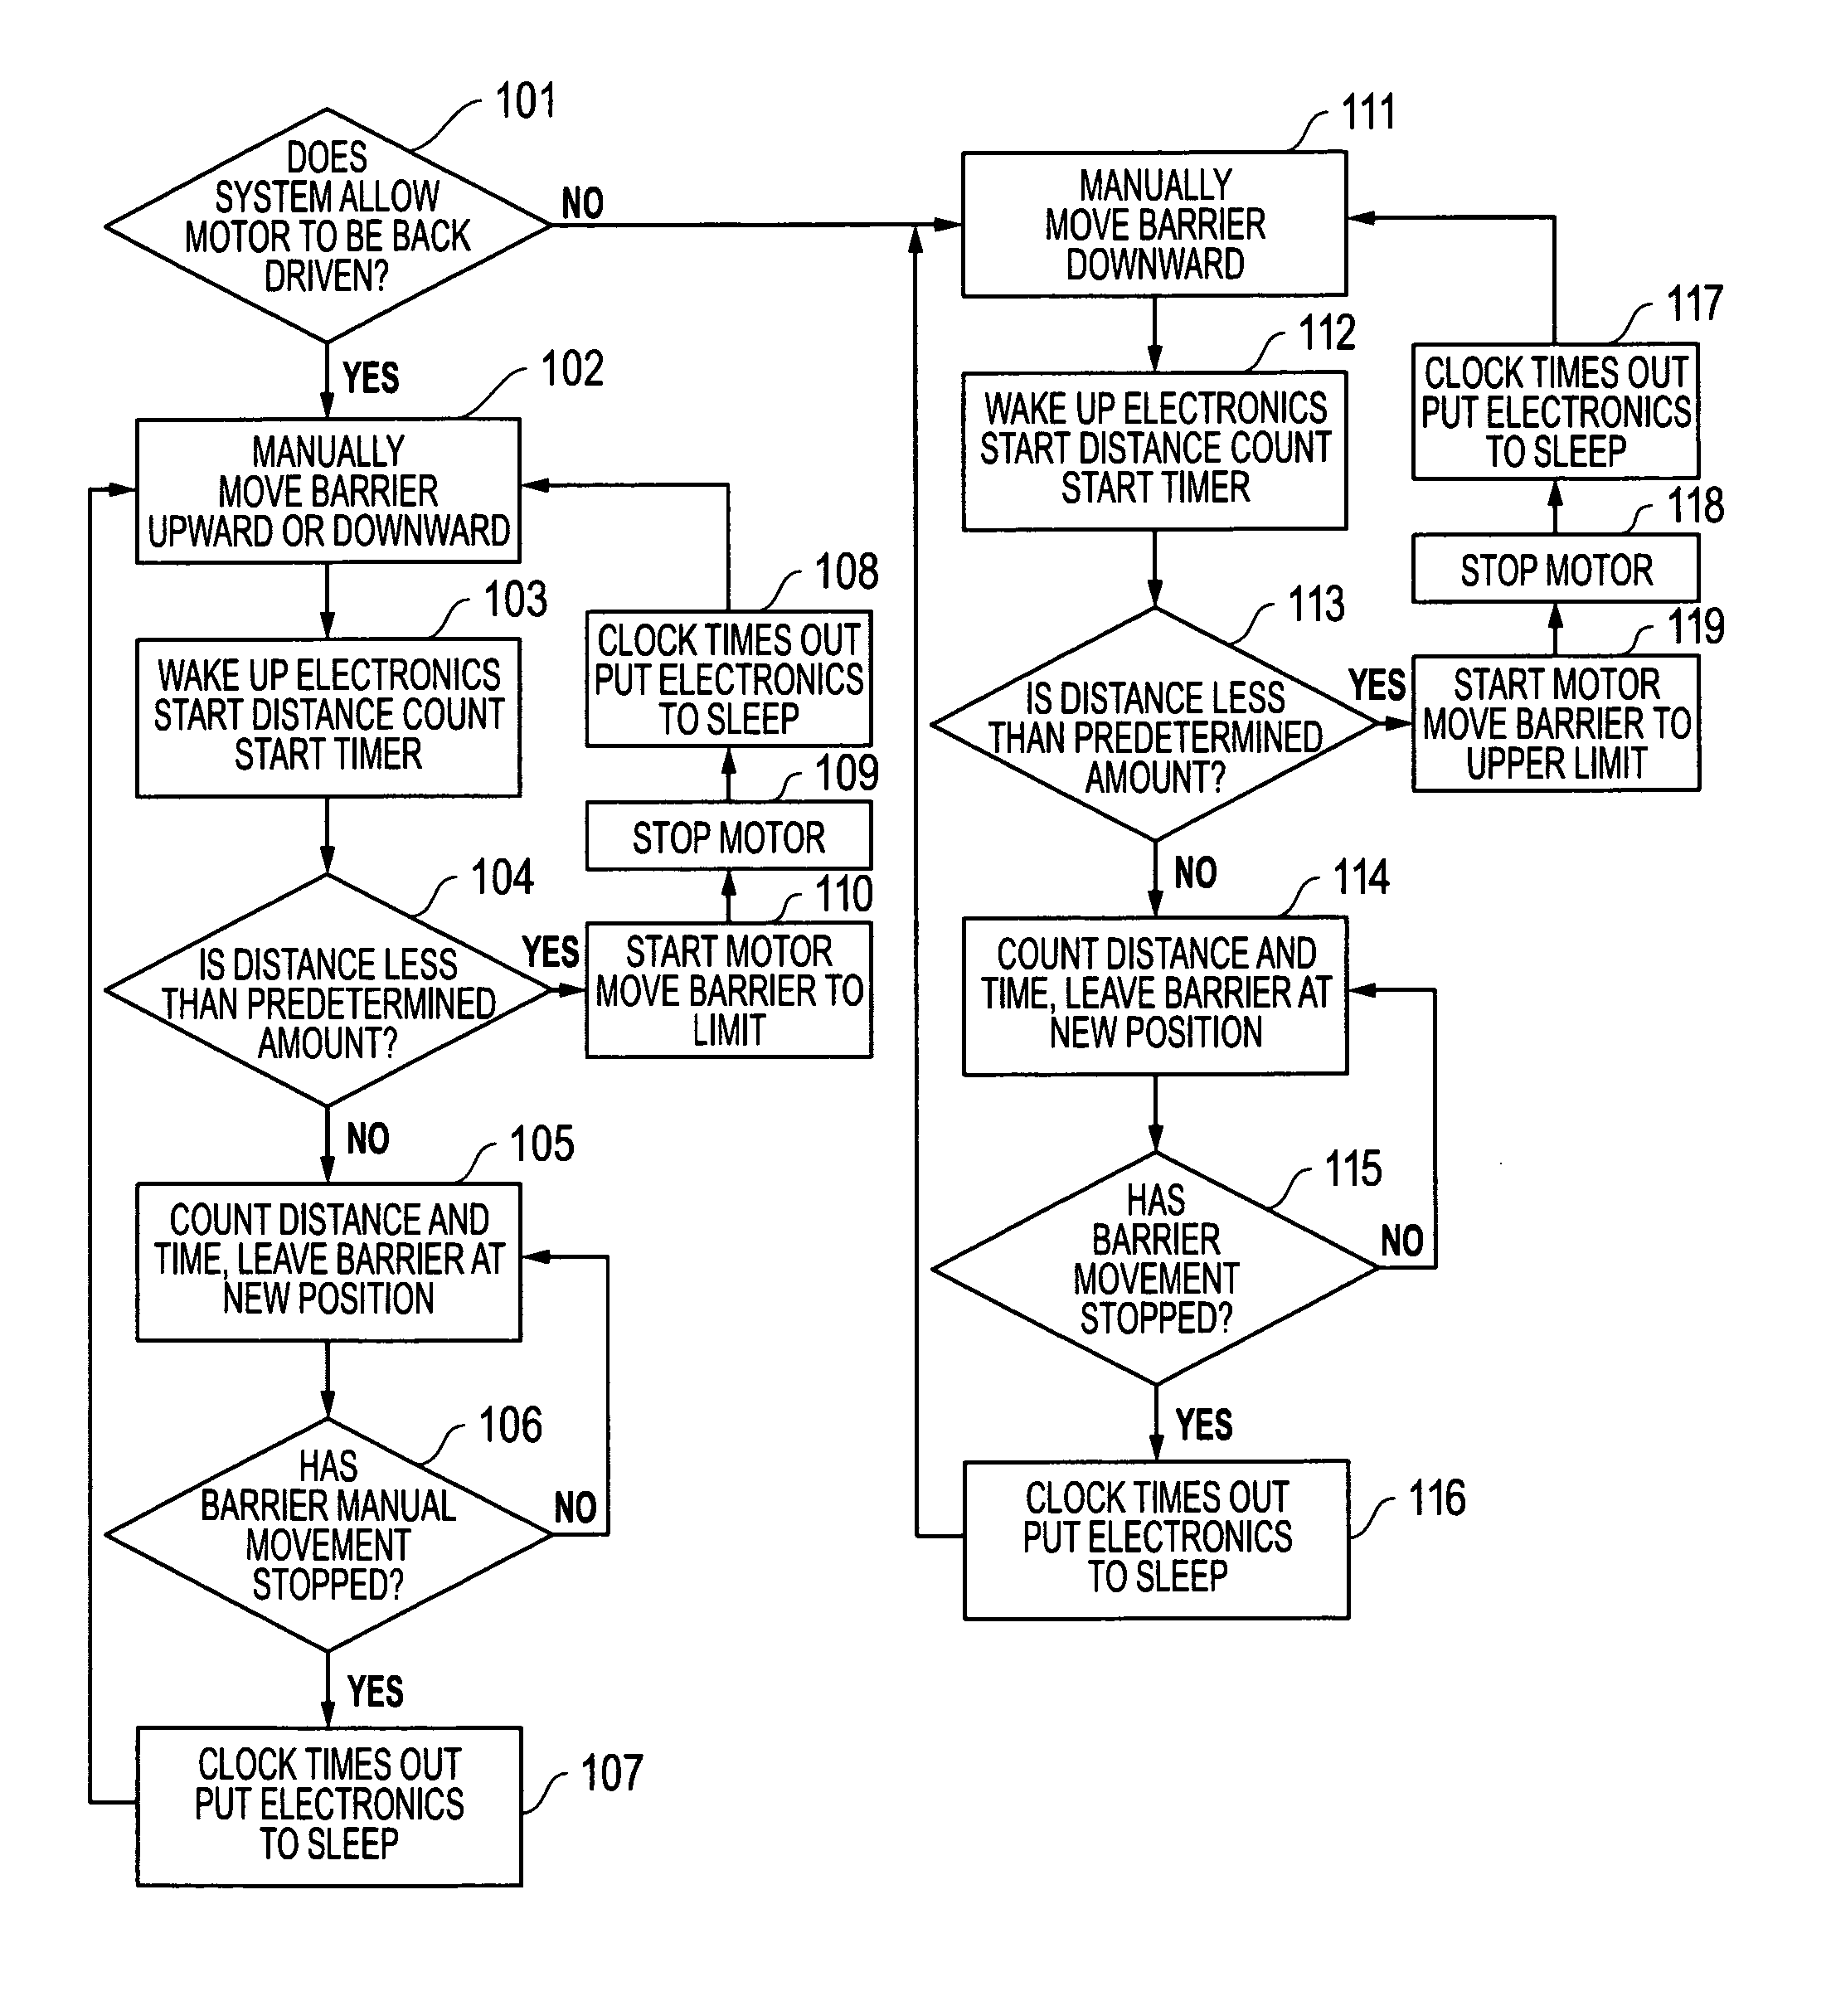 Motorized barrier adjustment apparatus and method